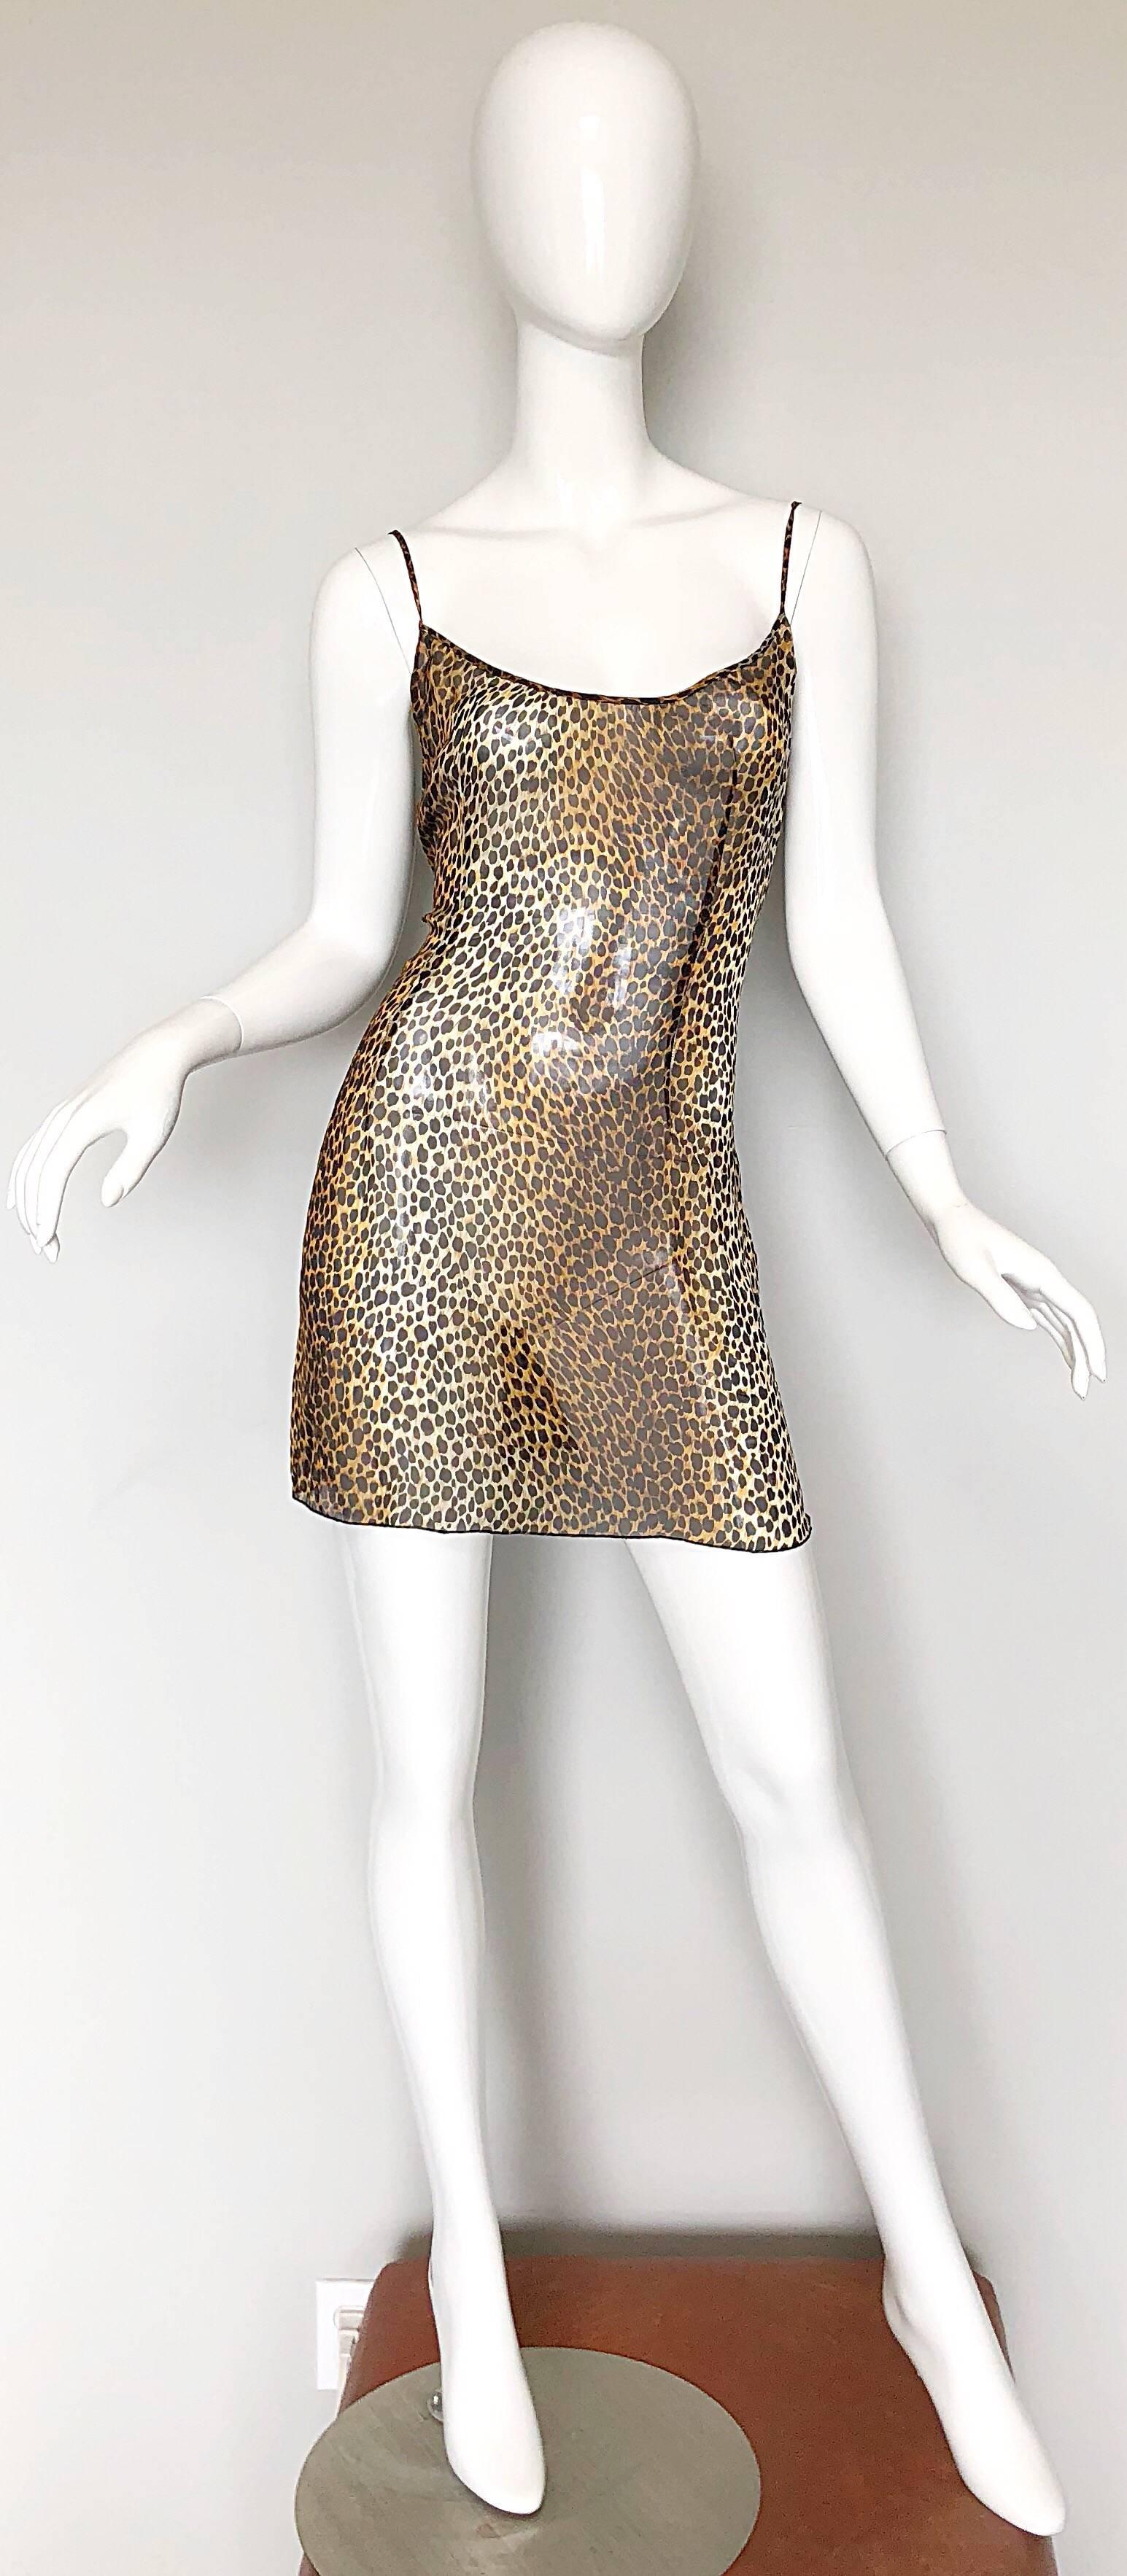 Sexy, yet flirty 90s DOLCE AND GABBANA leopard print semi sheer silk chiffon mini dress or top! Features allover classic animal print throughout. Hidden zipper up the side with hook-and-eye closure. Great layered with just a bra, or over jeans or